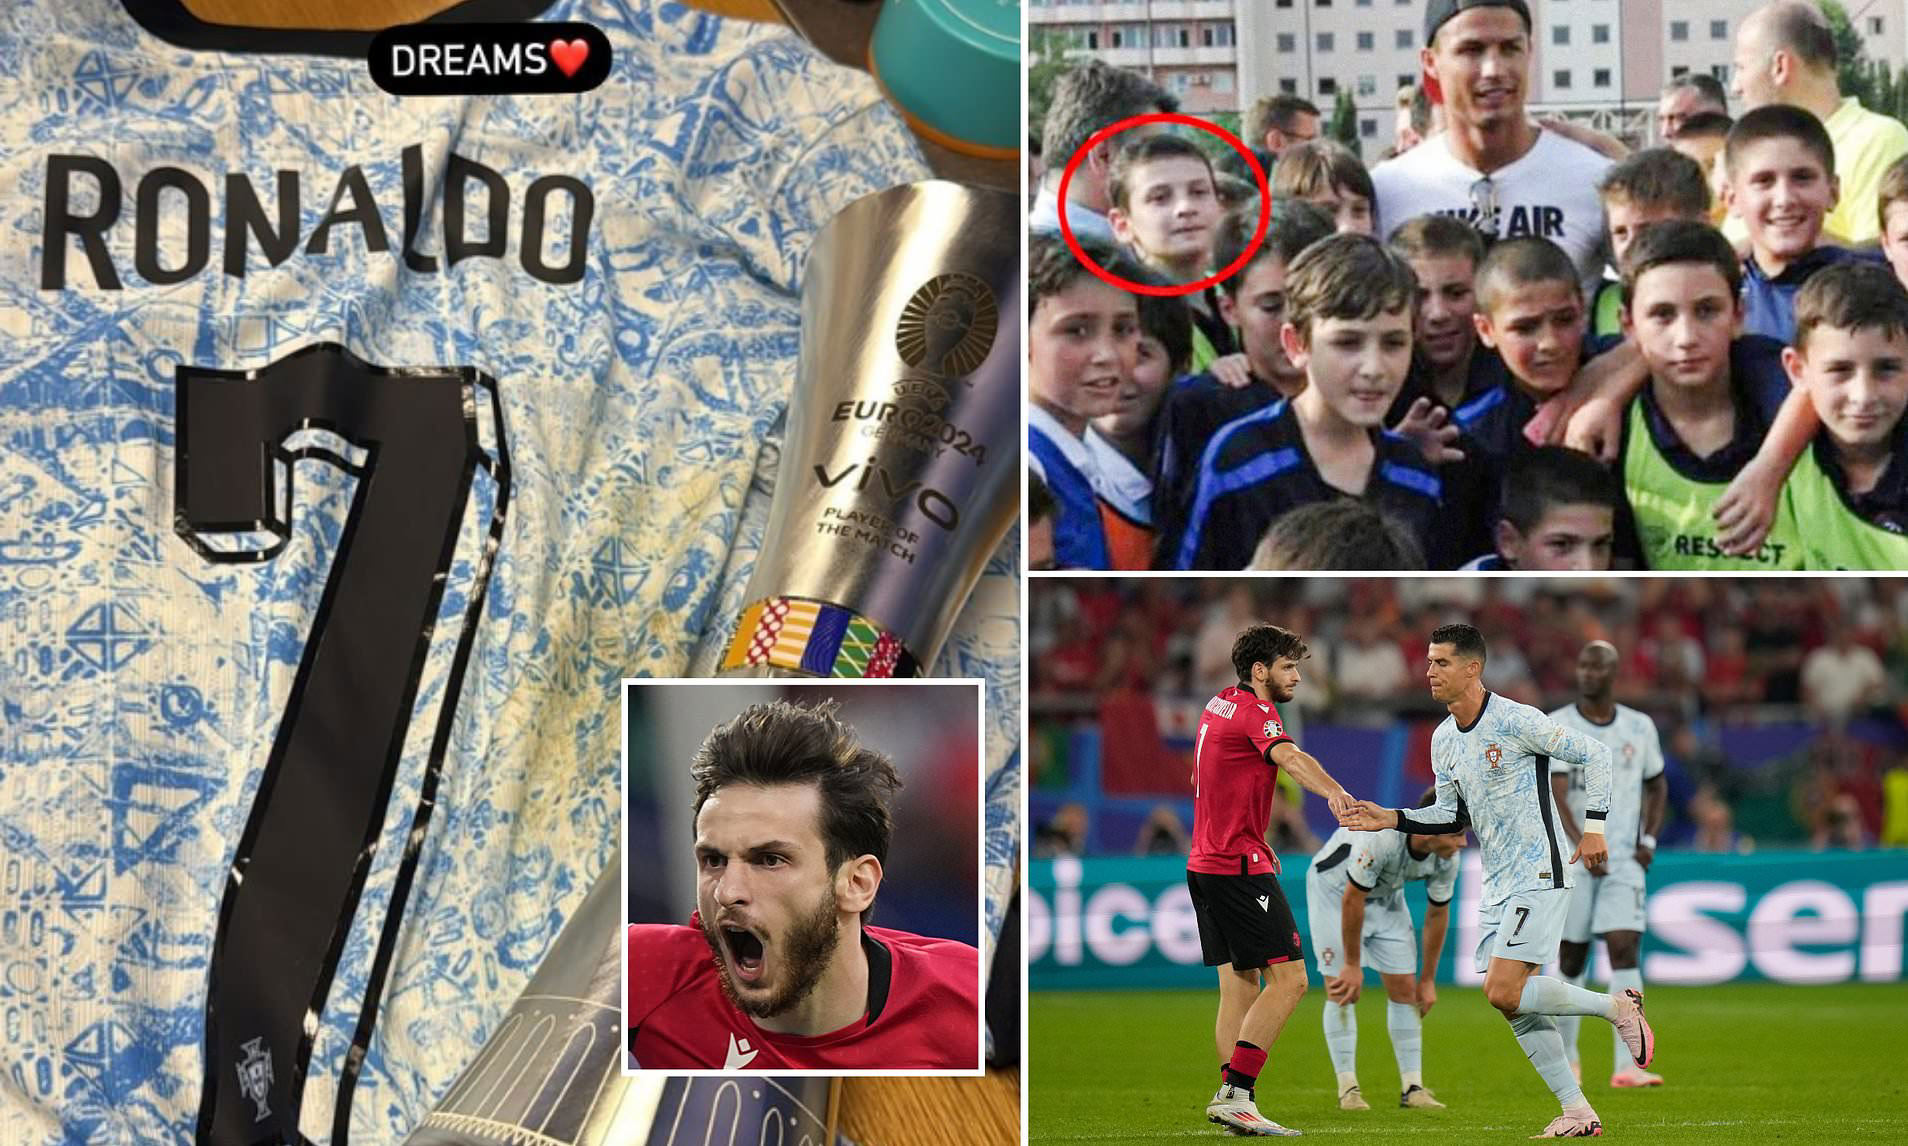 Georgia hero Khvicha Kvaratskhelia puts celebrations on hold after beating Portugal to grab Cristiano Ronaldo's shirt... 11 years after first meeting the Real Madrid legend when he opened Dinamo Tbilisi's academy